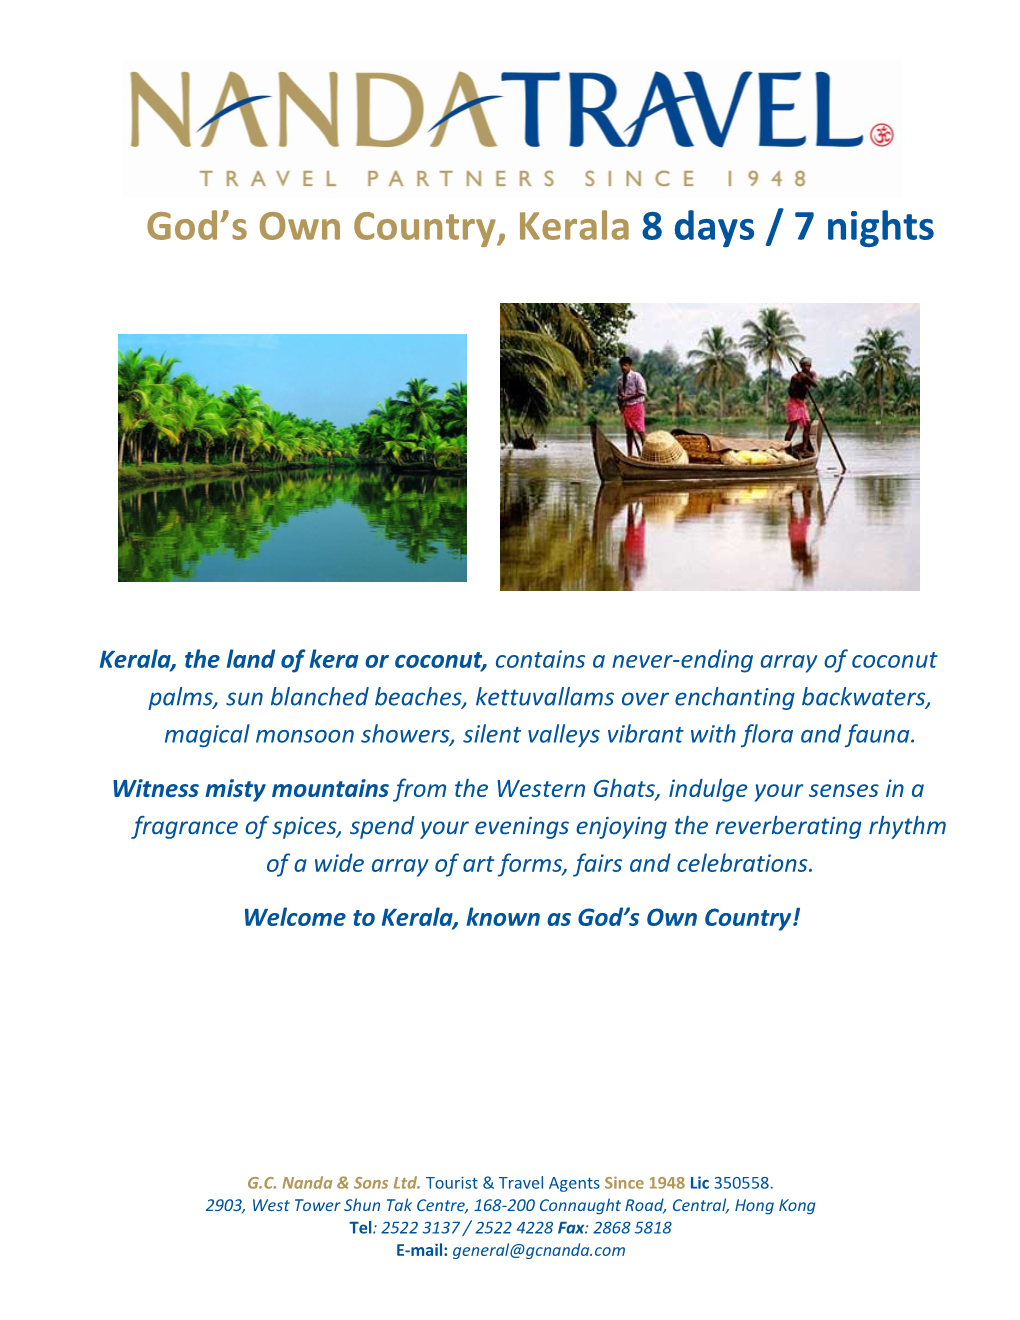 God's Own Country, Kerala 8 Days / 7 Nights